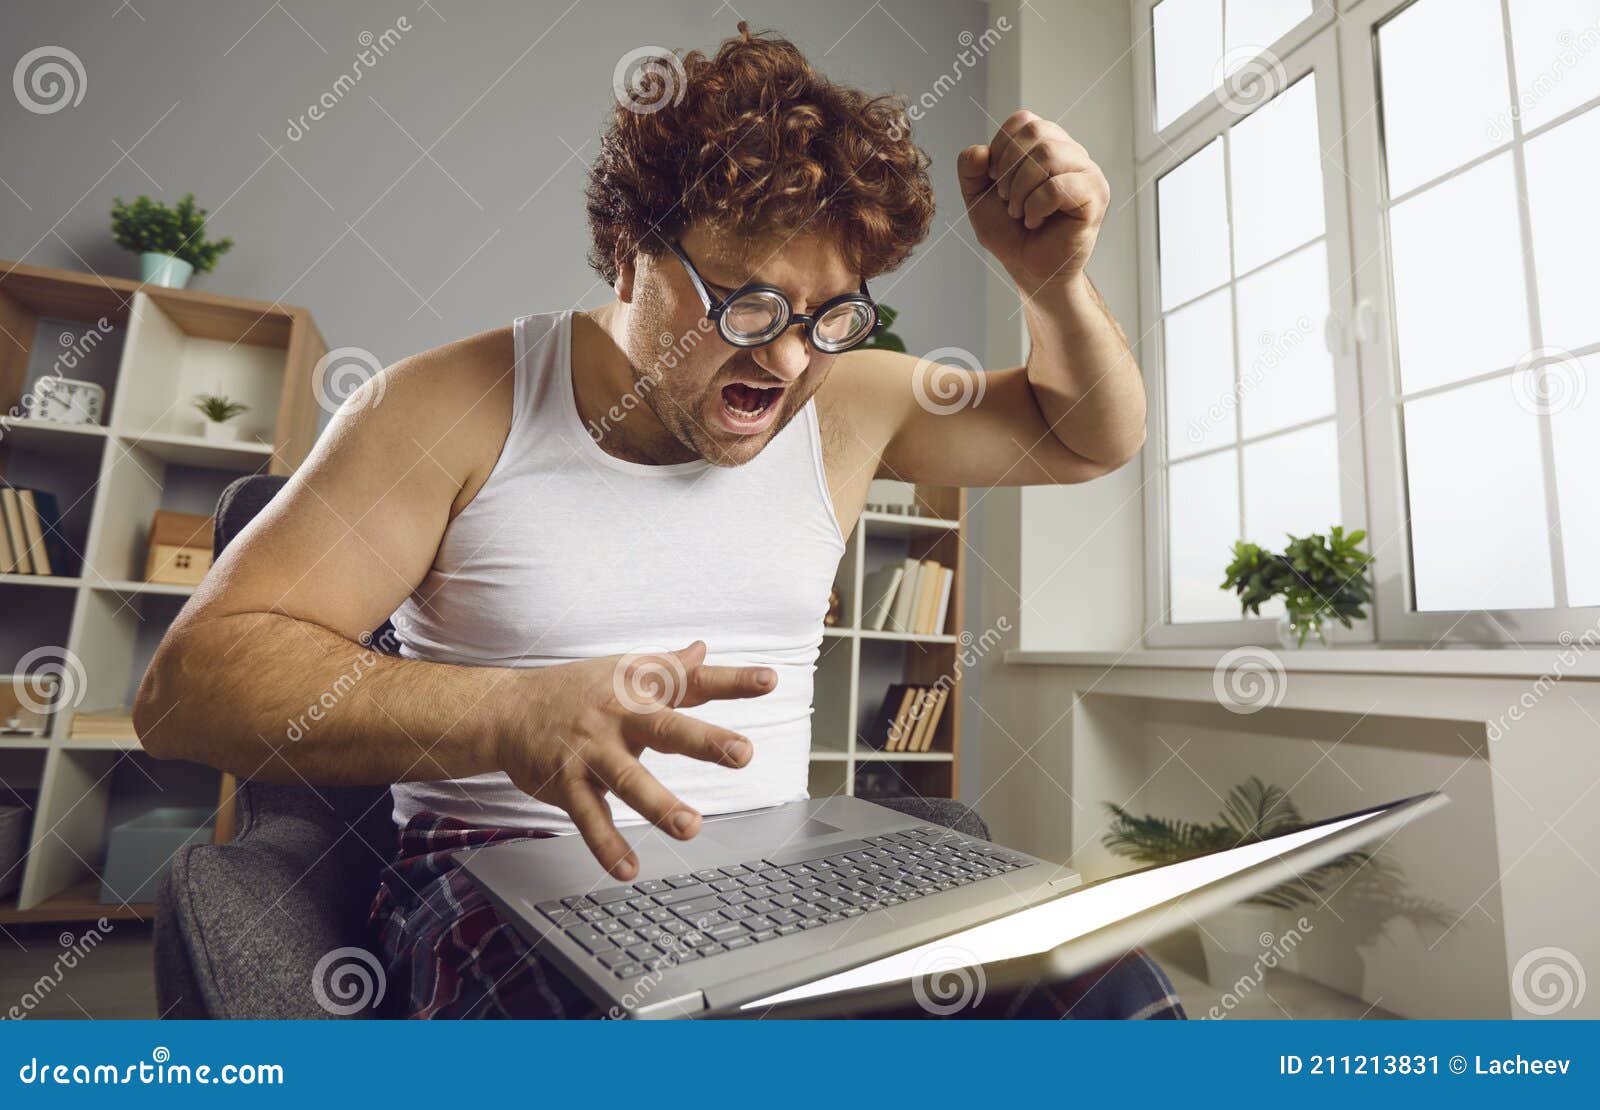 Funny Nerdy Man Having Problem with His Laptop, Shouting and Threatening To  Break it Stock Image - Image of internet, backup: 211213831